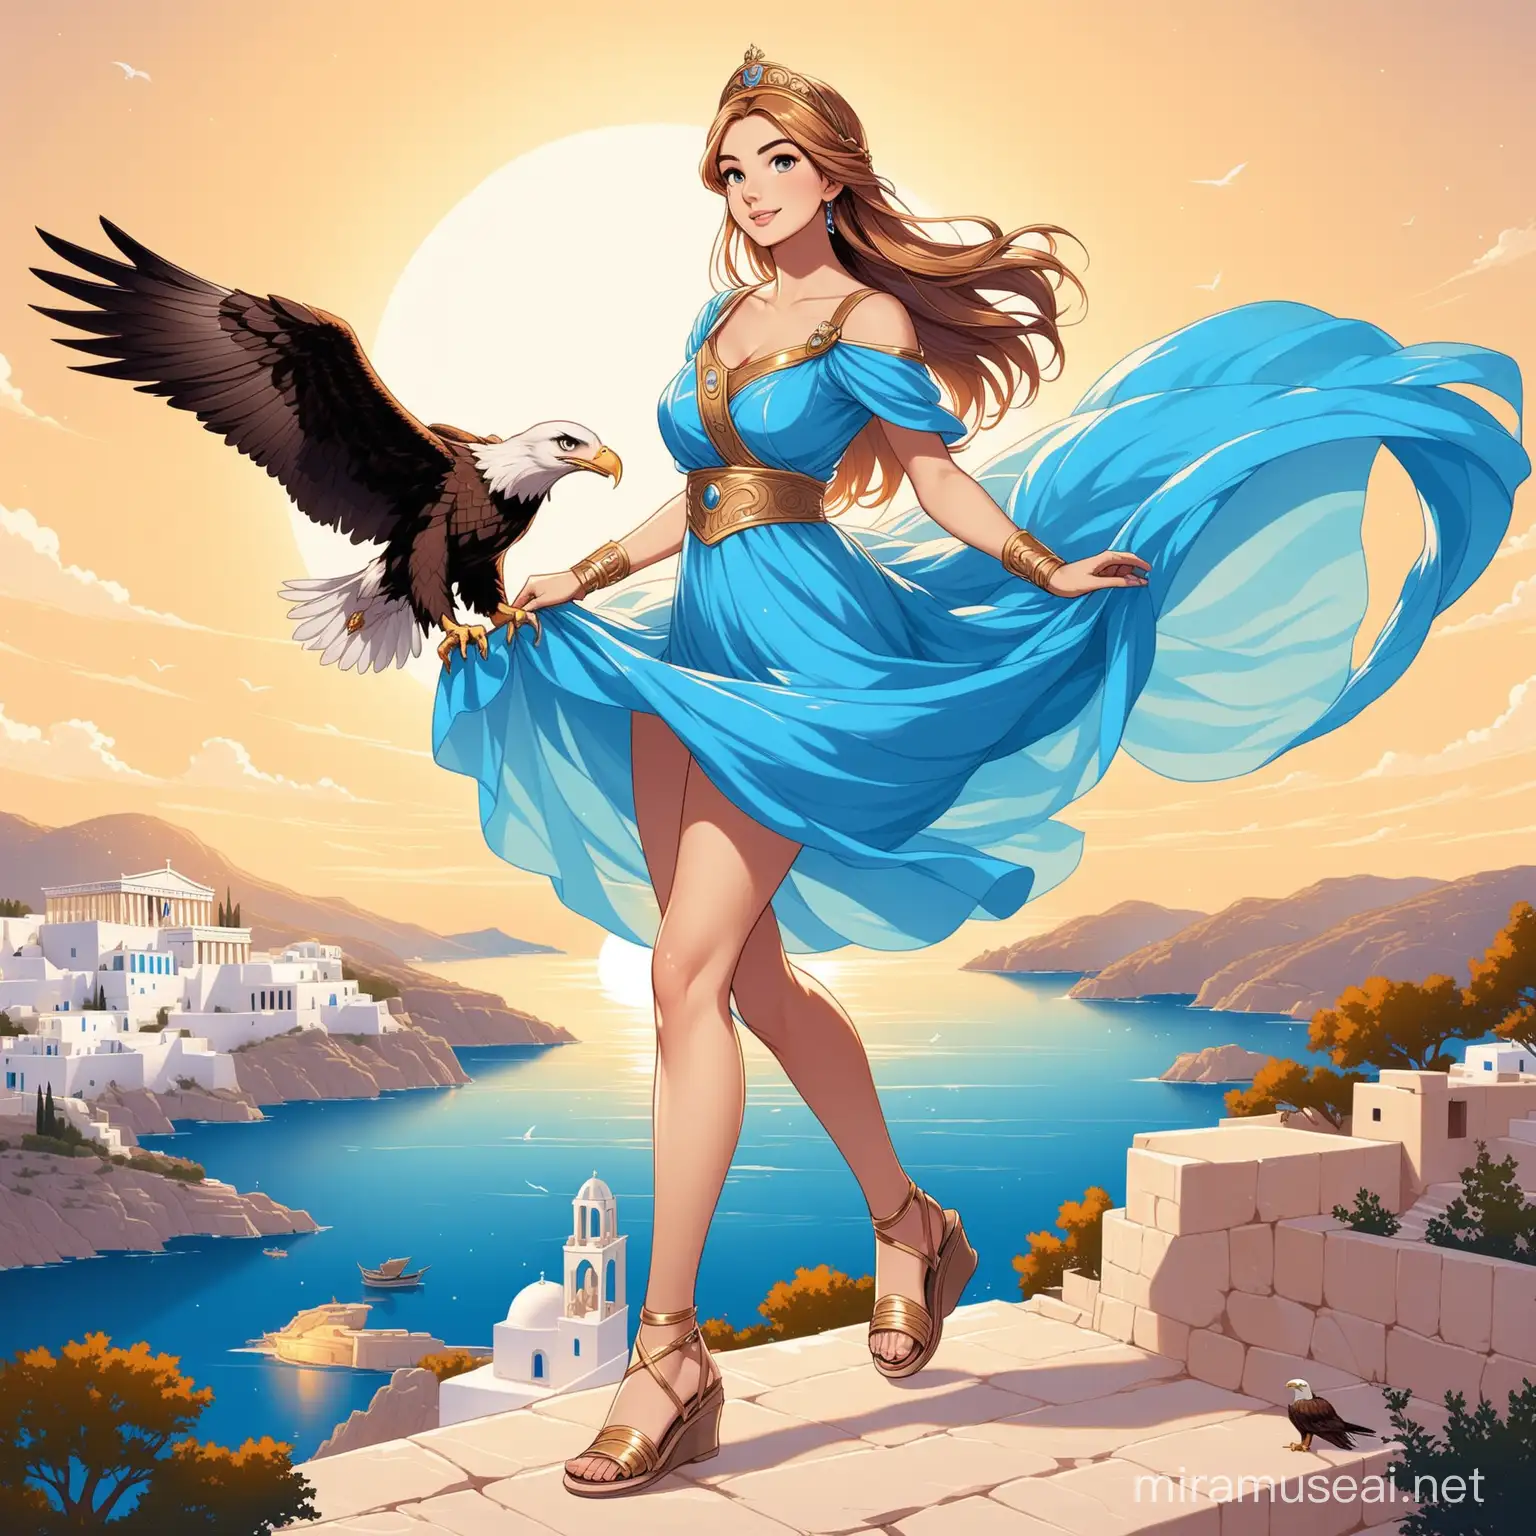 Greek Cinderella with sandals and flying an eagle